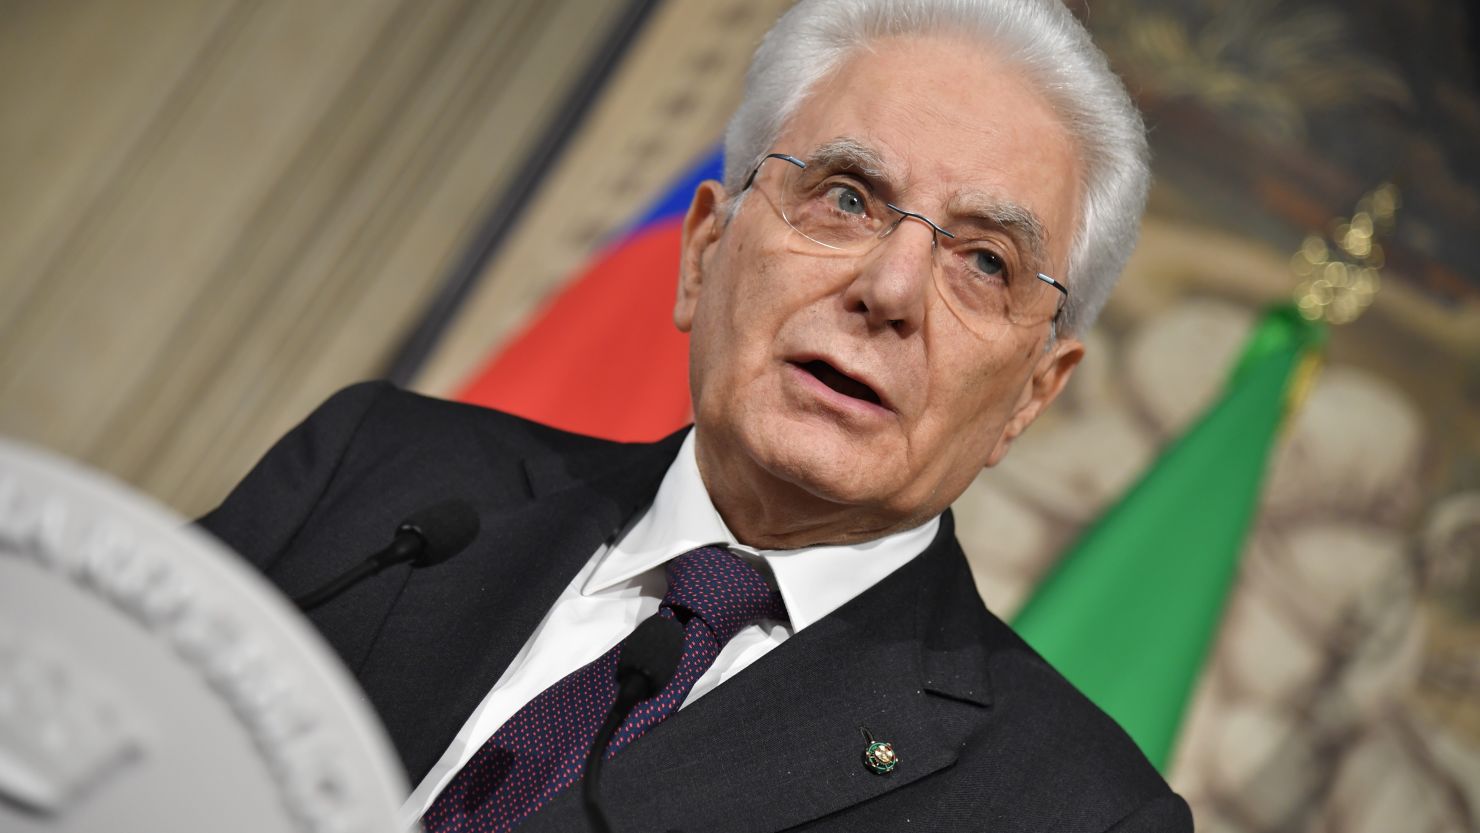 Italian President Sergio Mattarella addresses journalists after consultations with political parties.